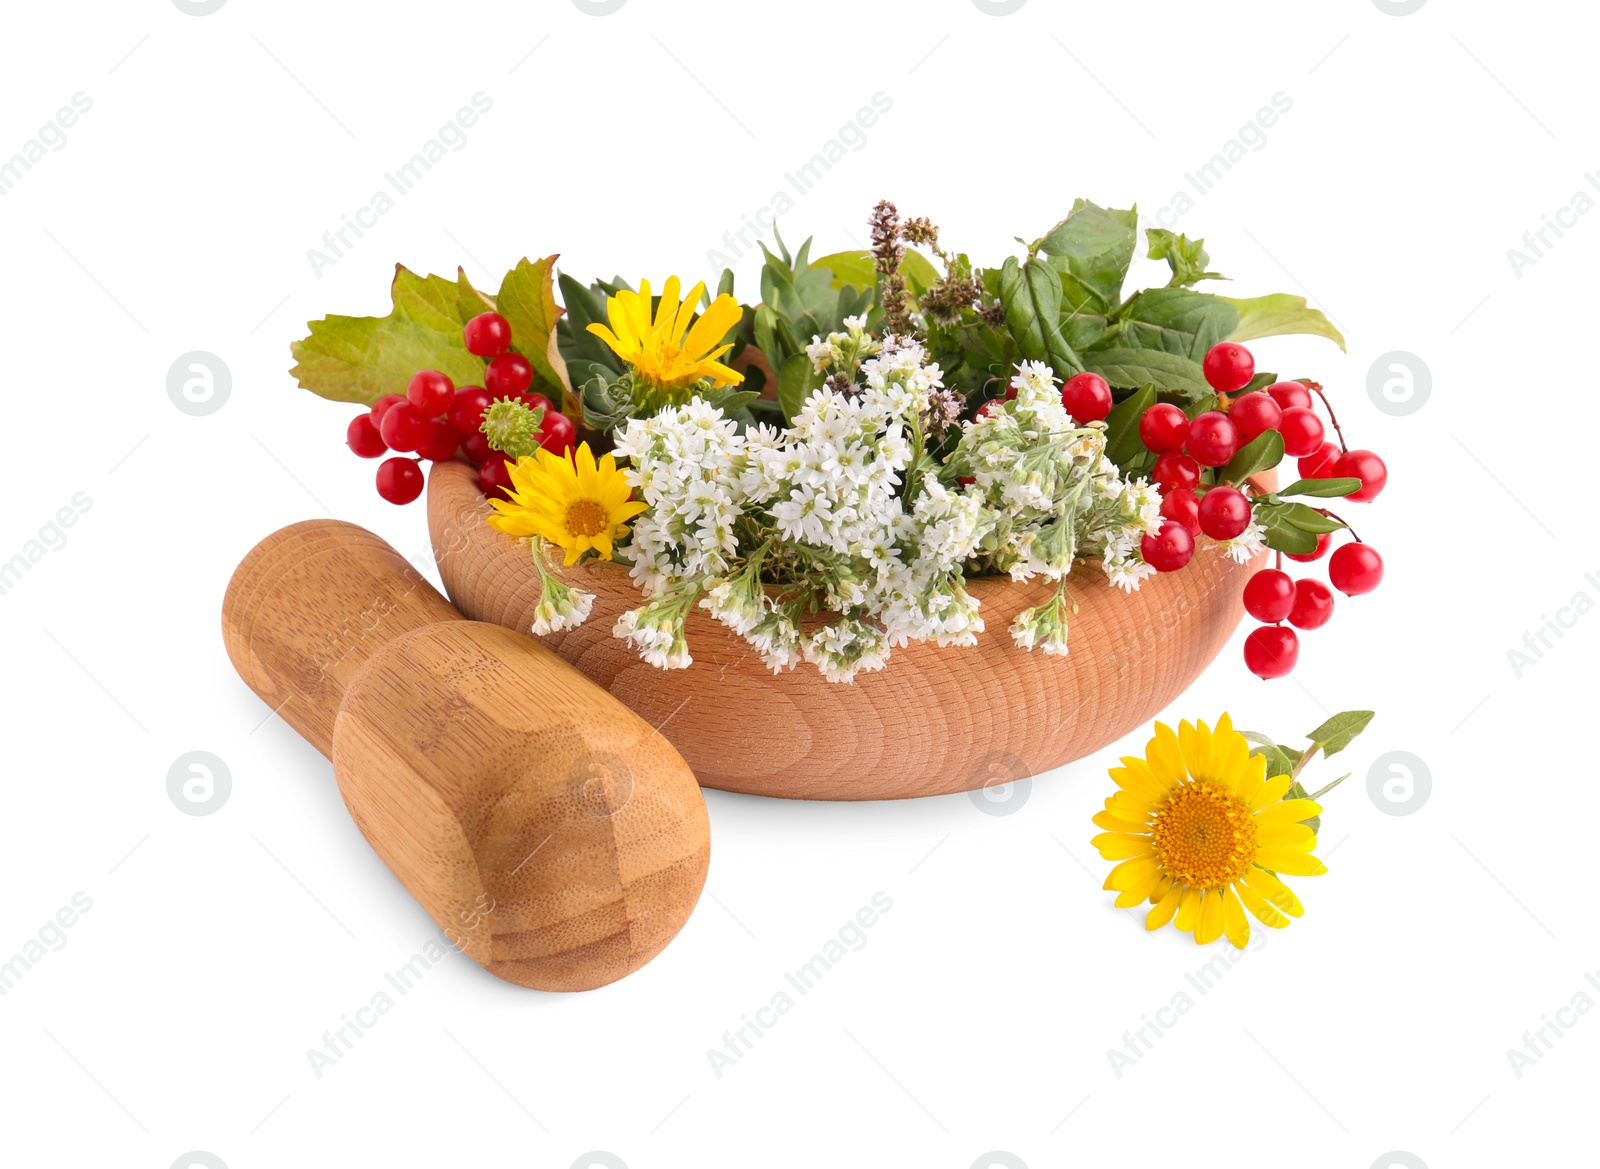 Photo of Wooden mortar with different flowers, berries and pestle on white background